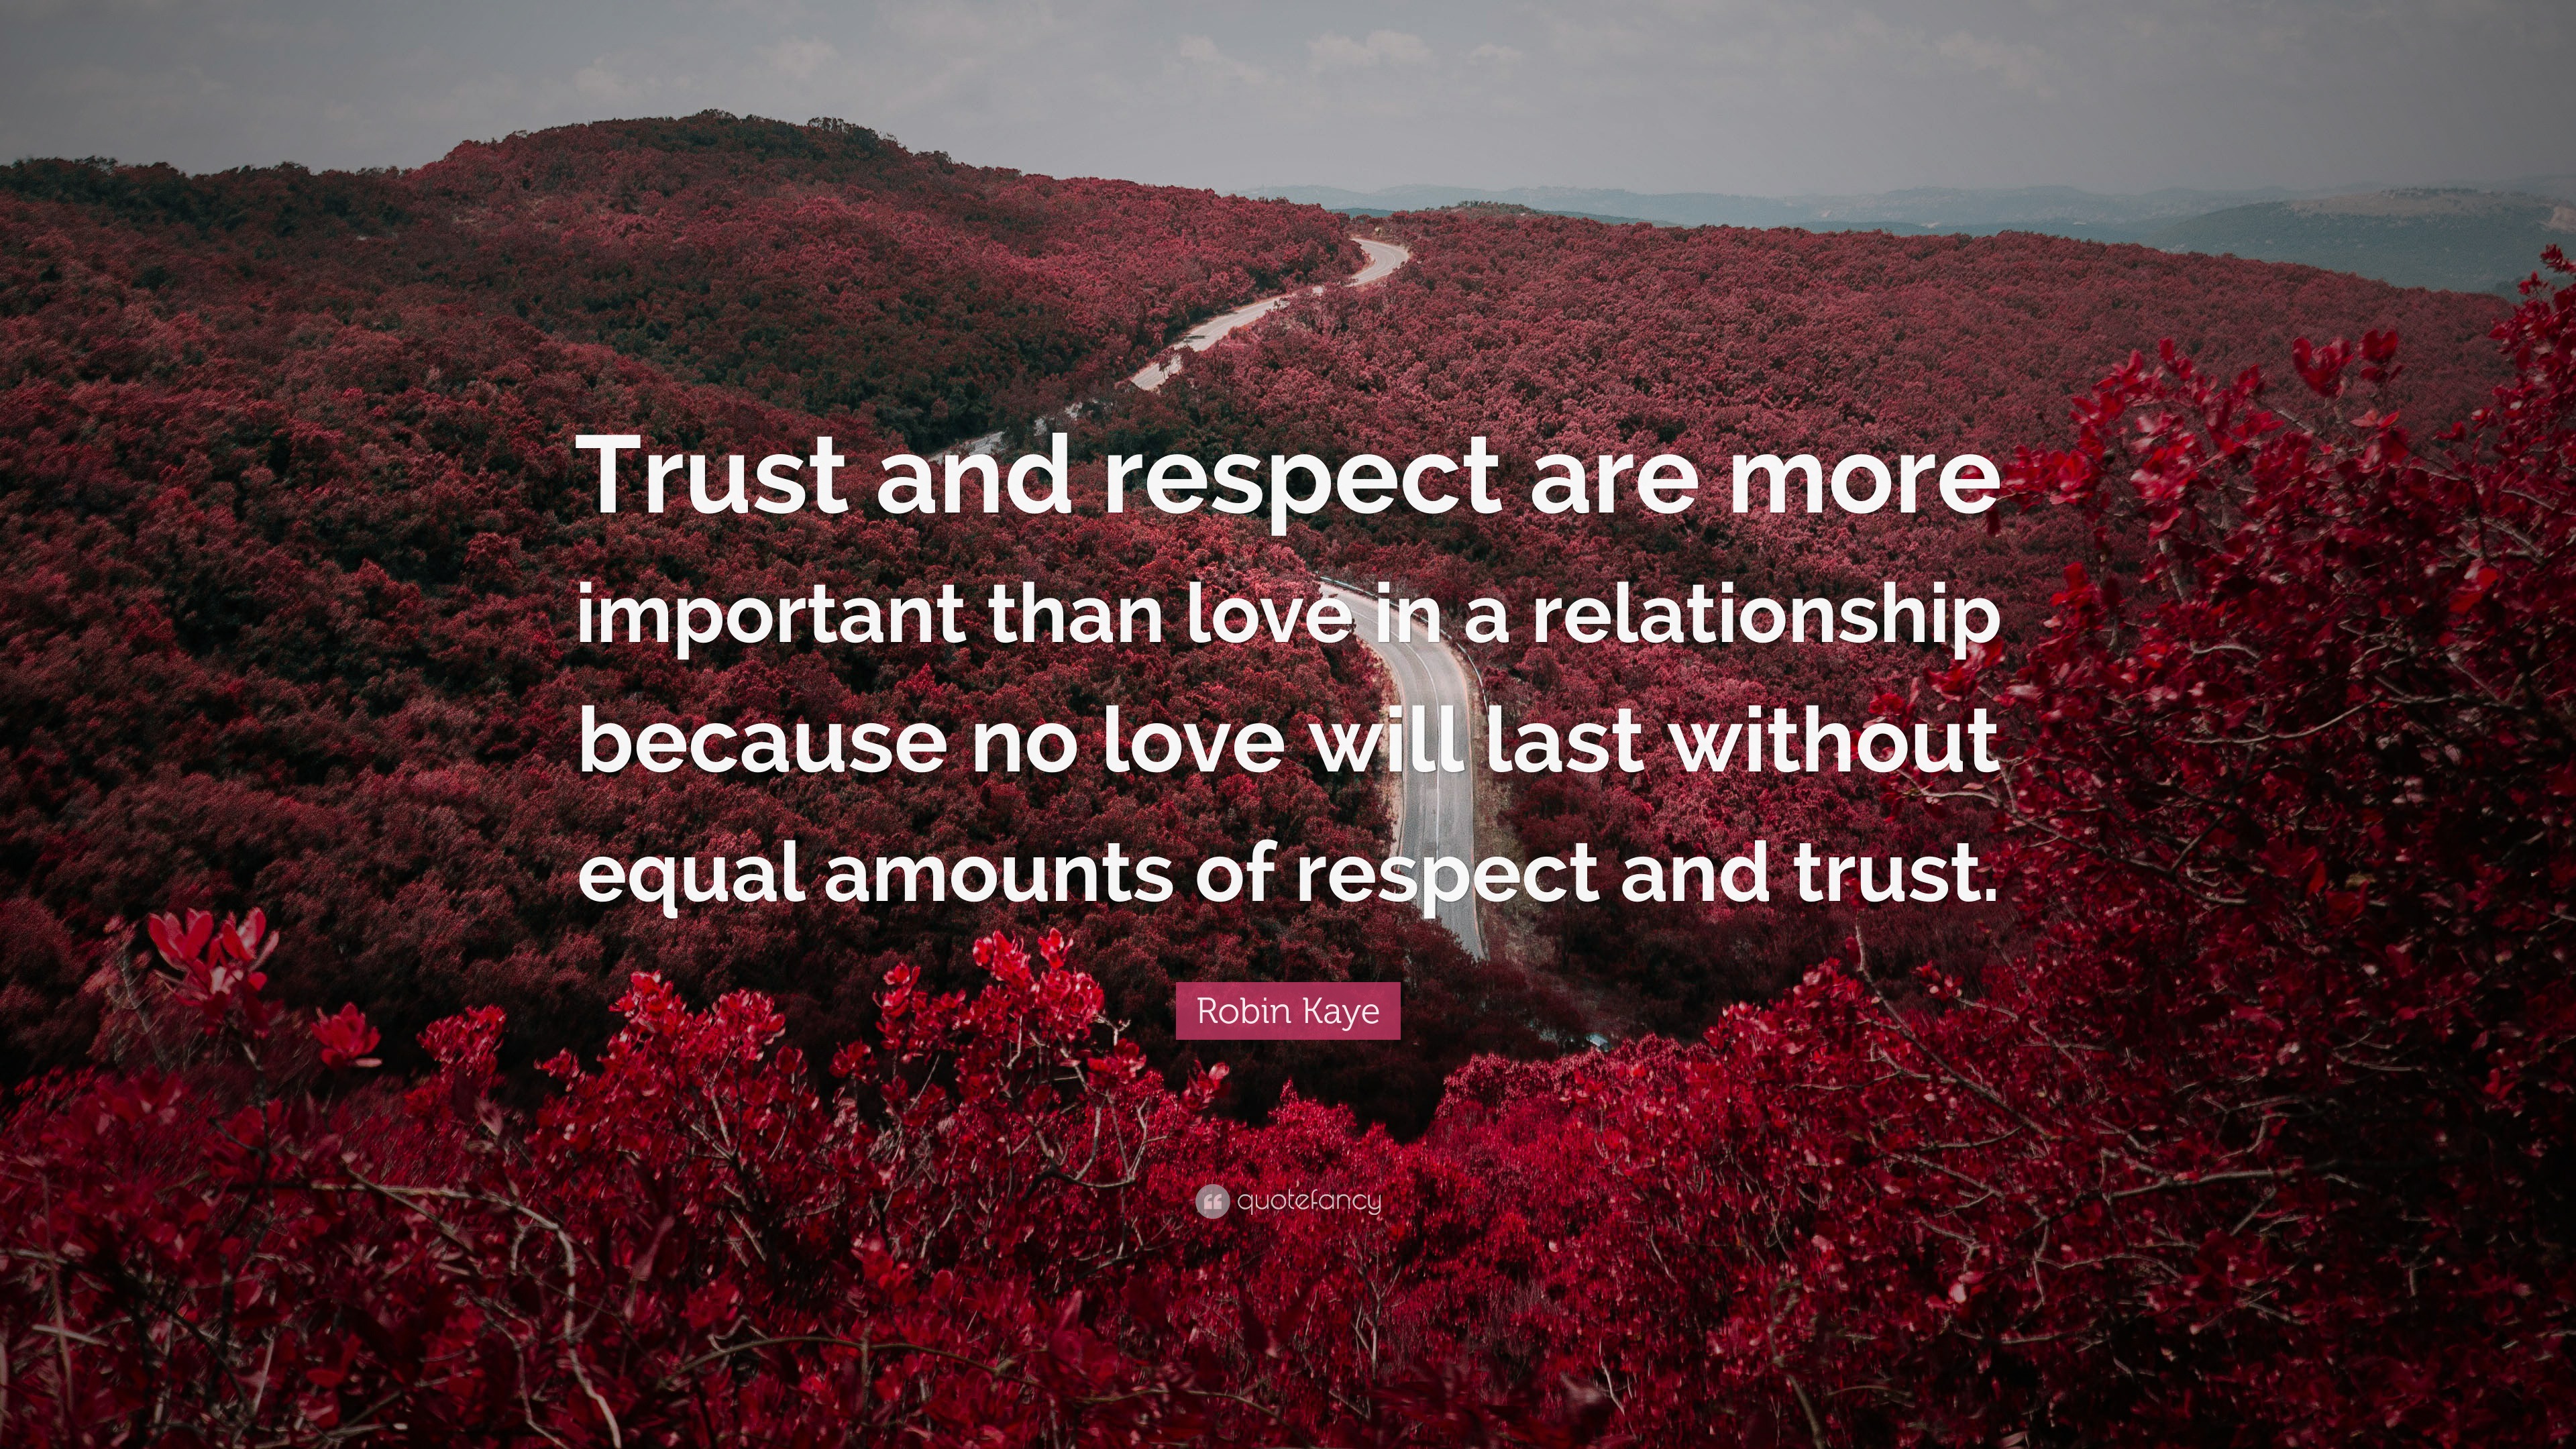 respect relationship quotes